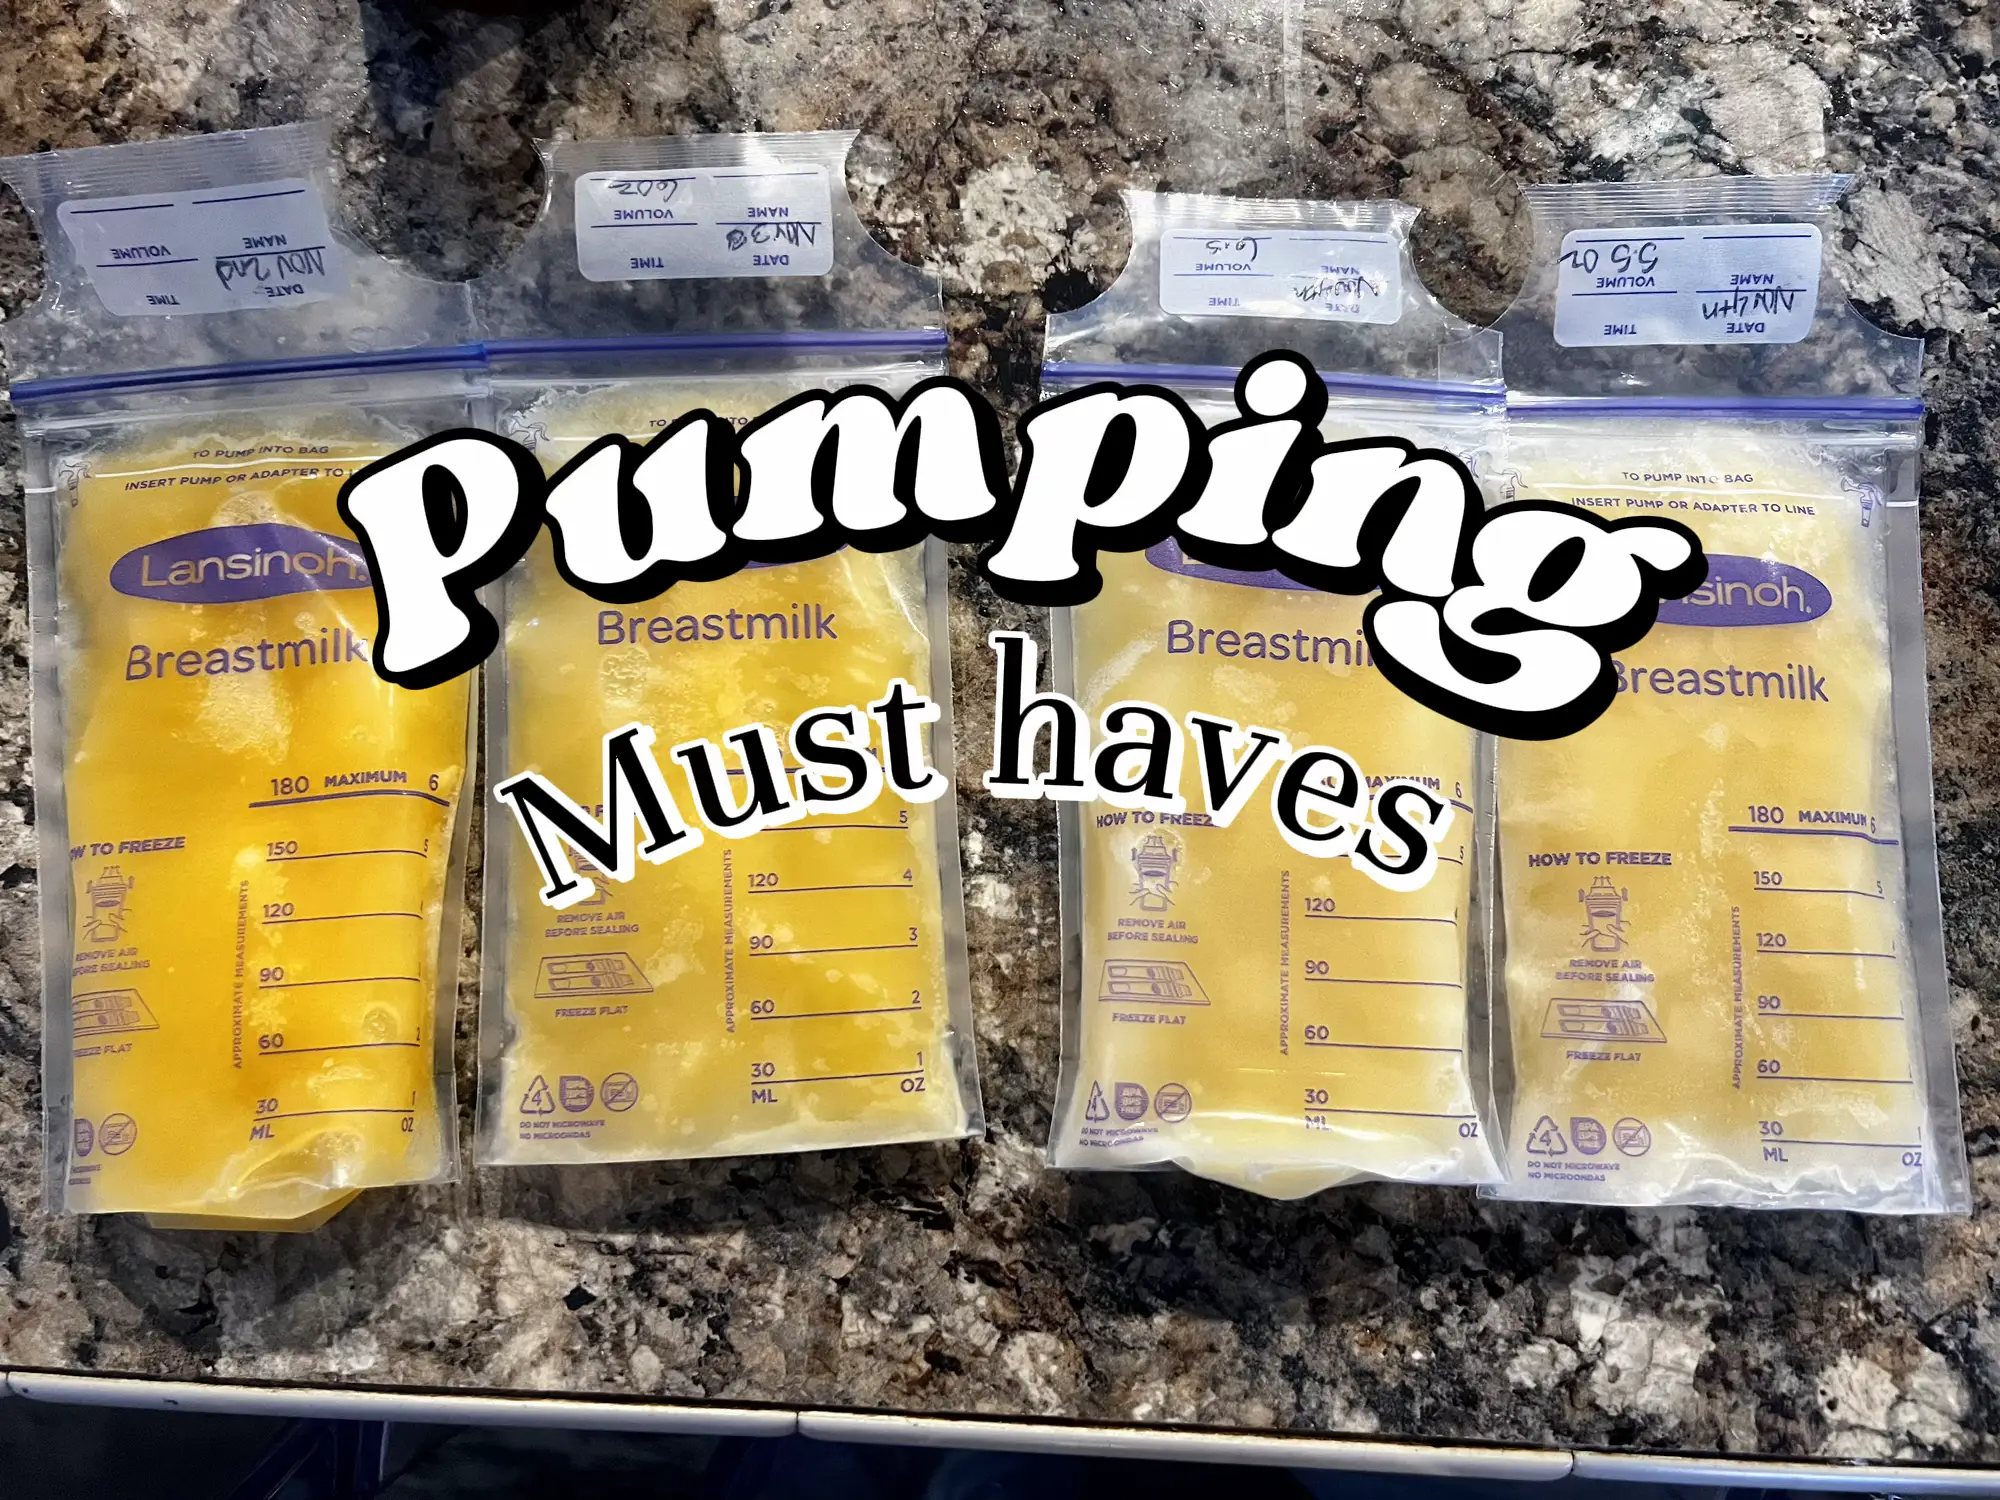 Exclusive Pumping Must-Haves - Lemon8 Search